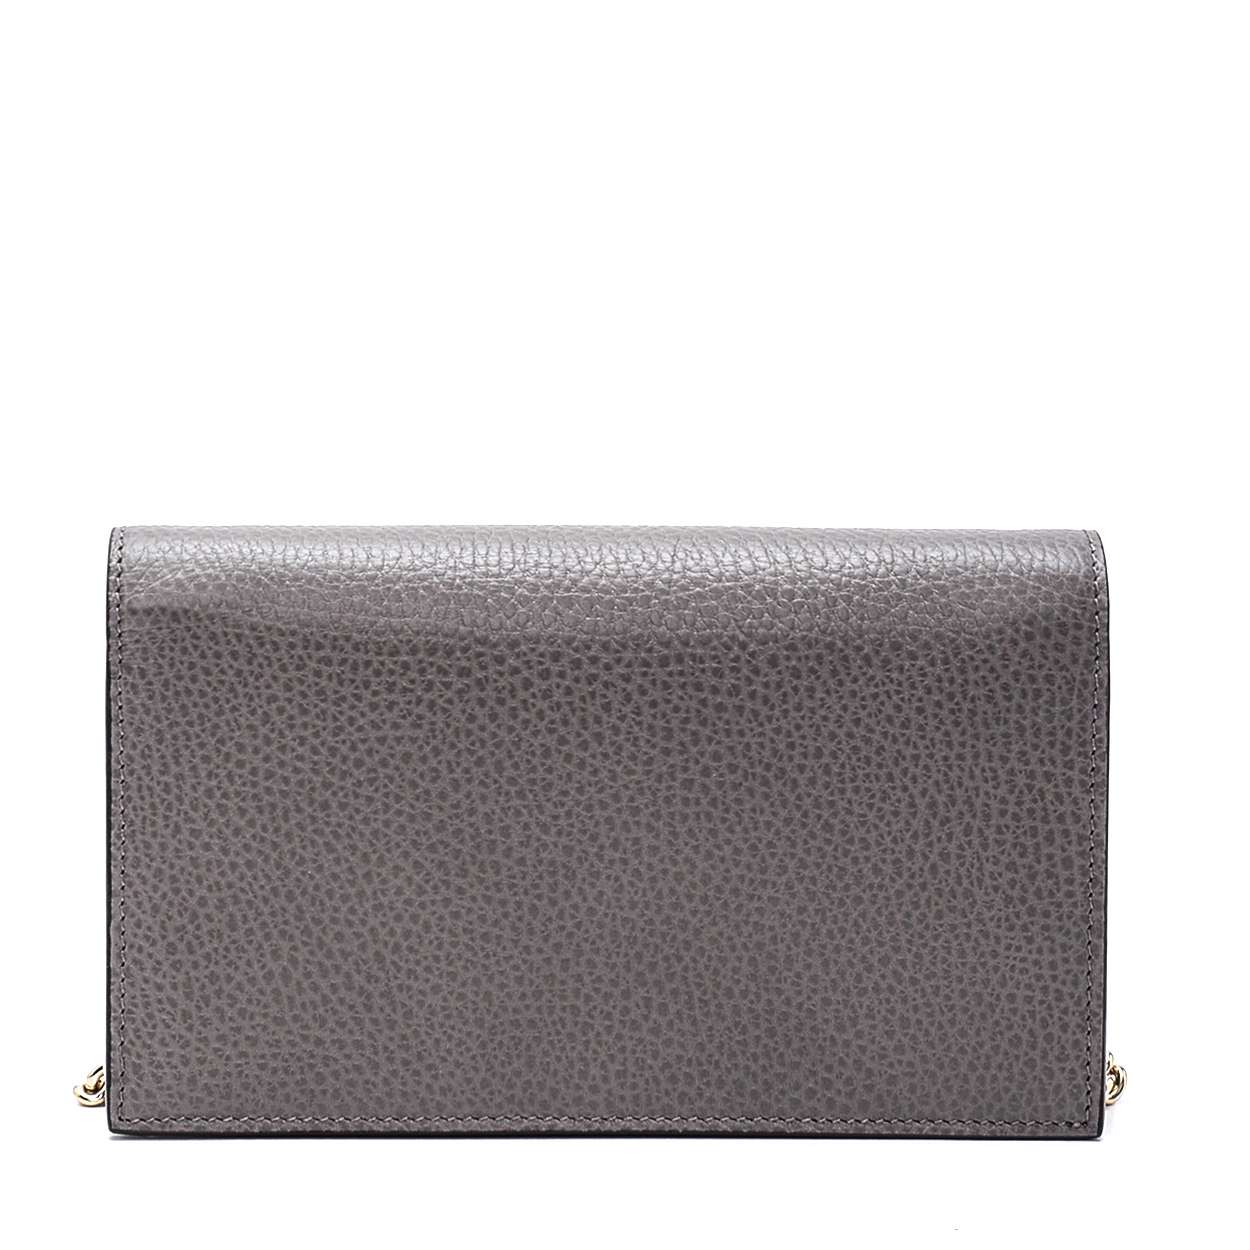 Gucci - Grey Granied Leather Wallet on Chain Bag